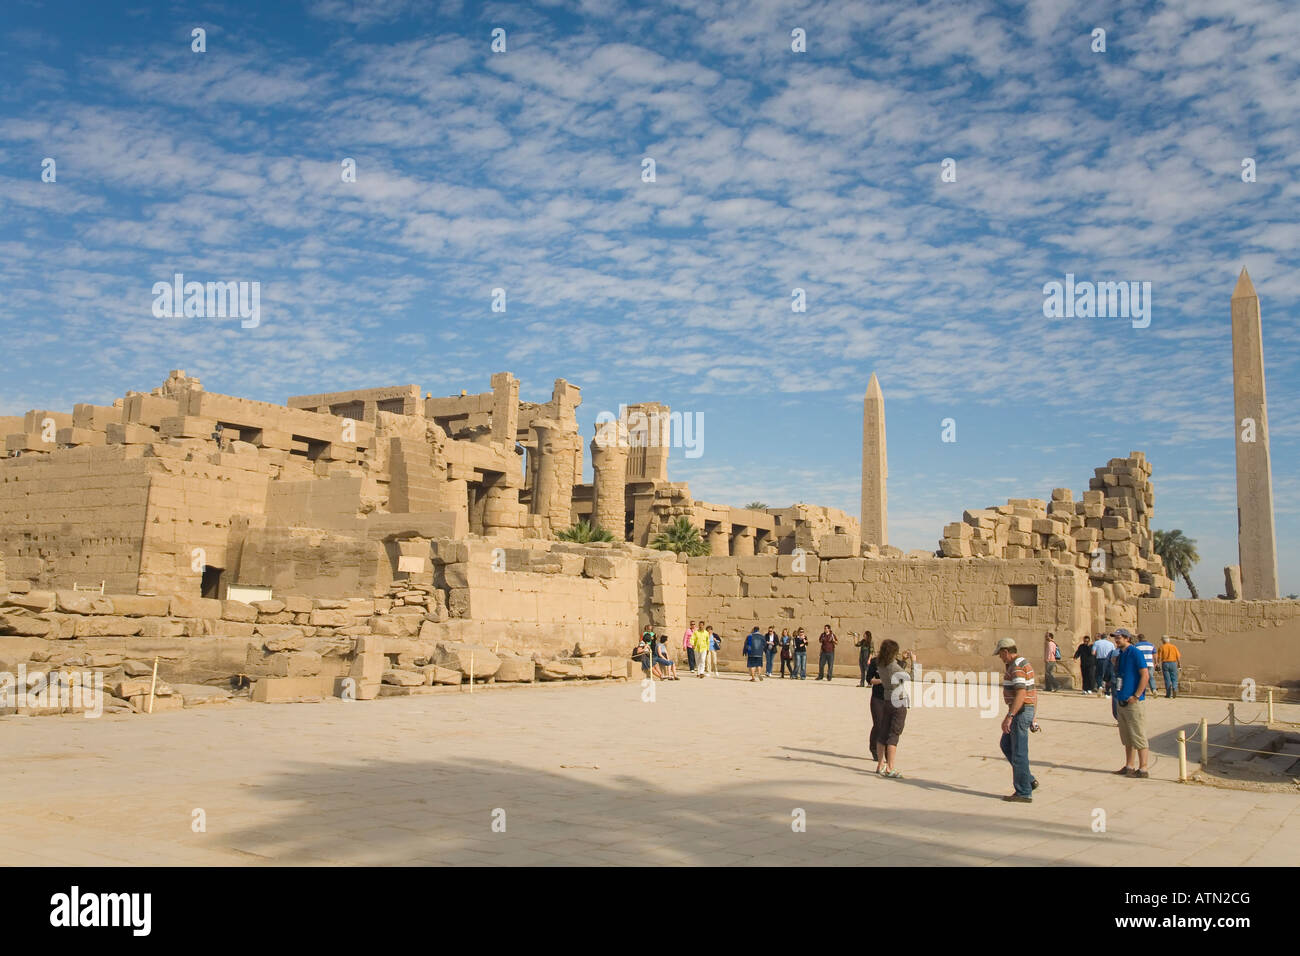 Temple of Amun-Re Amun Re with courtyard obelisks and columns with visitors and tourists Karnak Egypt North Africa Stock Photo